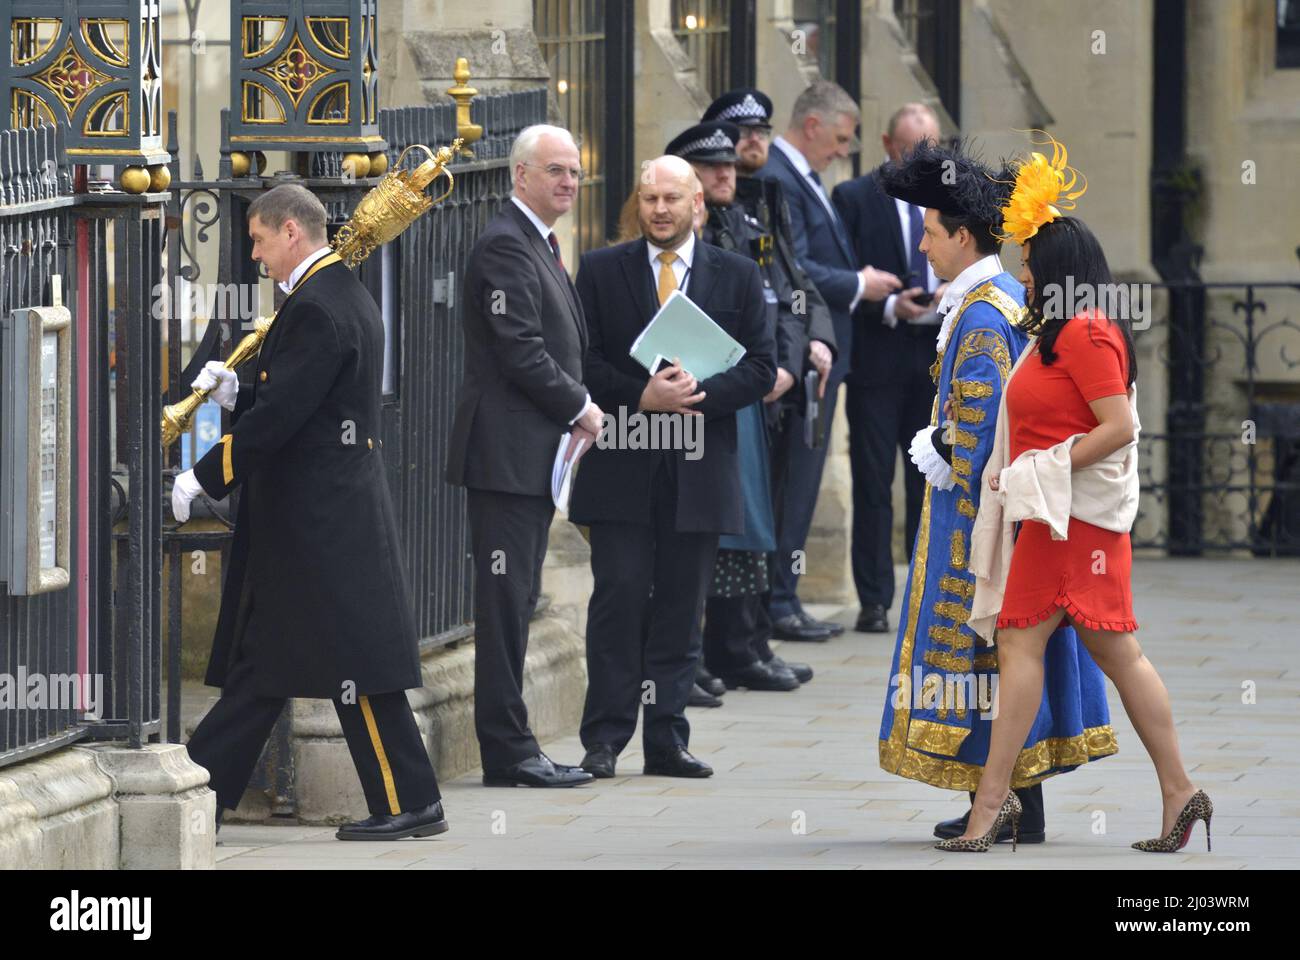 Andrew Smith - Right Worshipful Lord Mayor of Westminster - arriving with his wife Salma Shah for the Commonwealth Service at Westminster Abbey, Londo Stock Photo